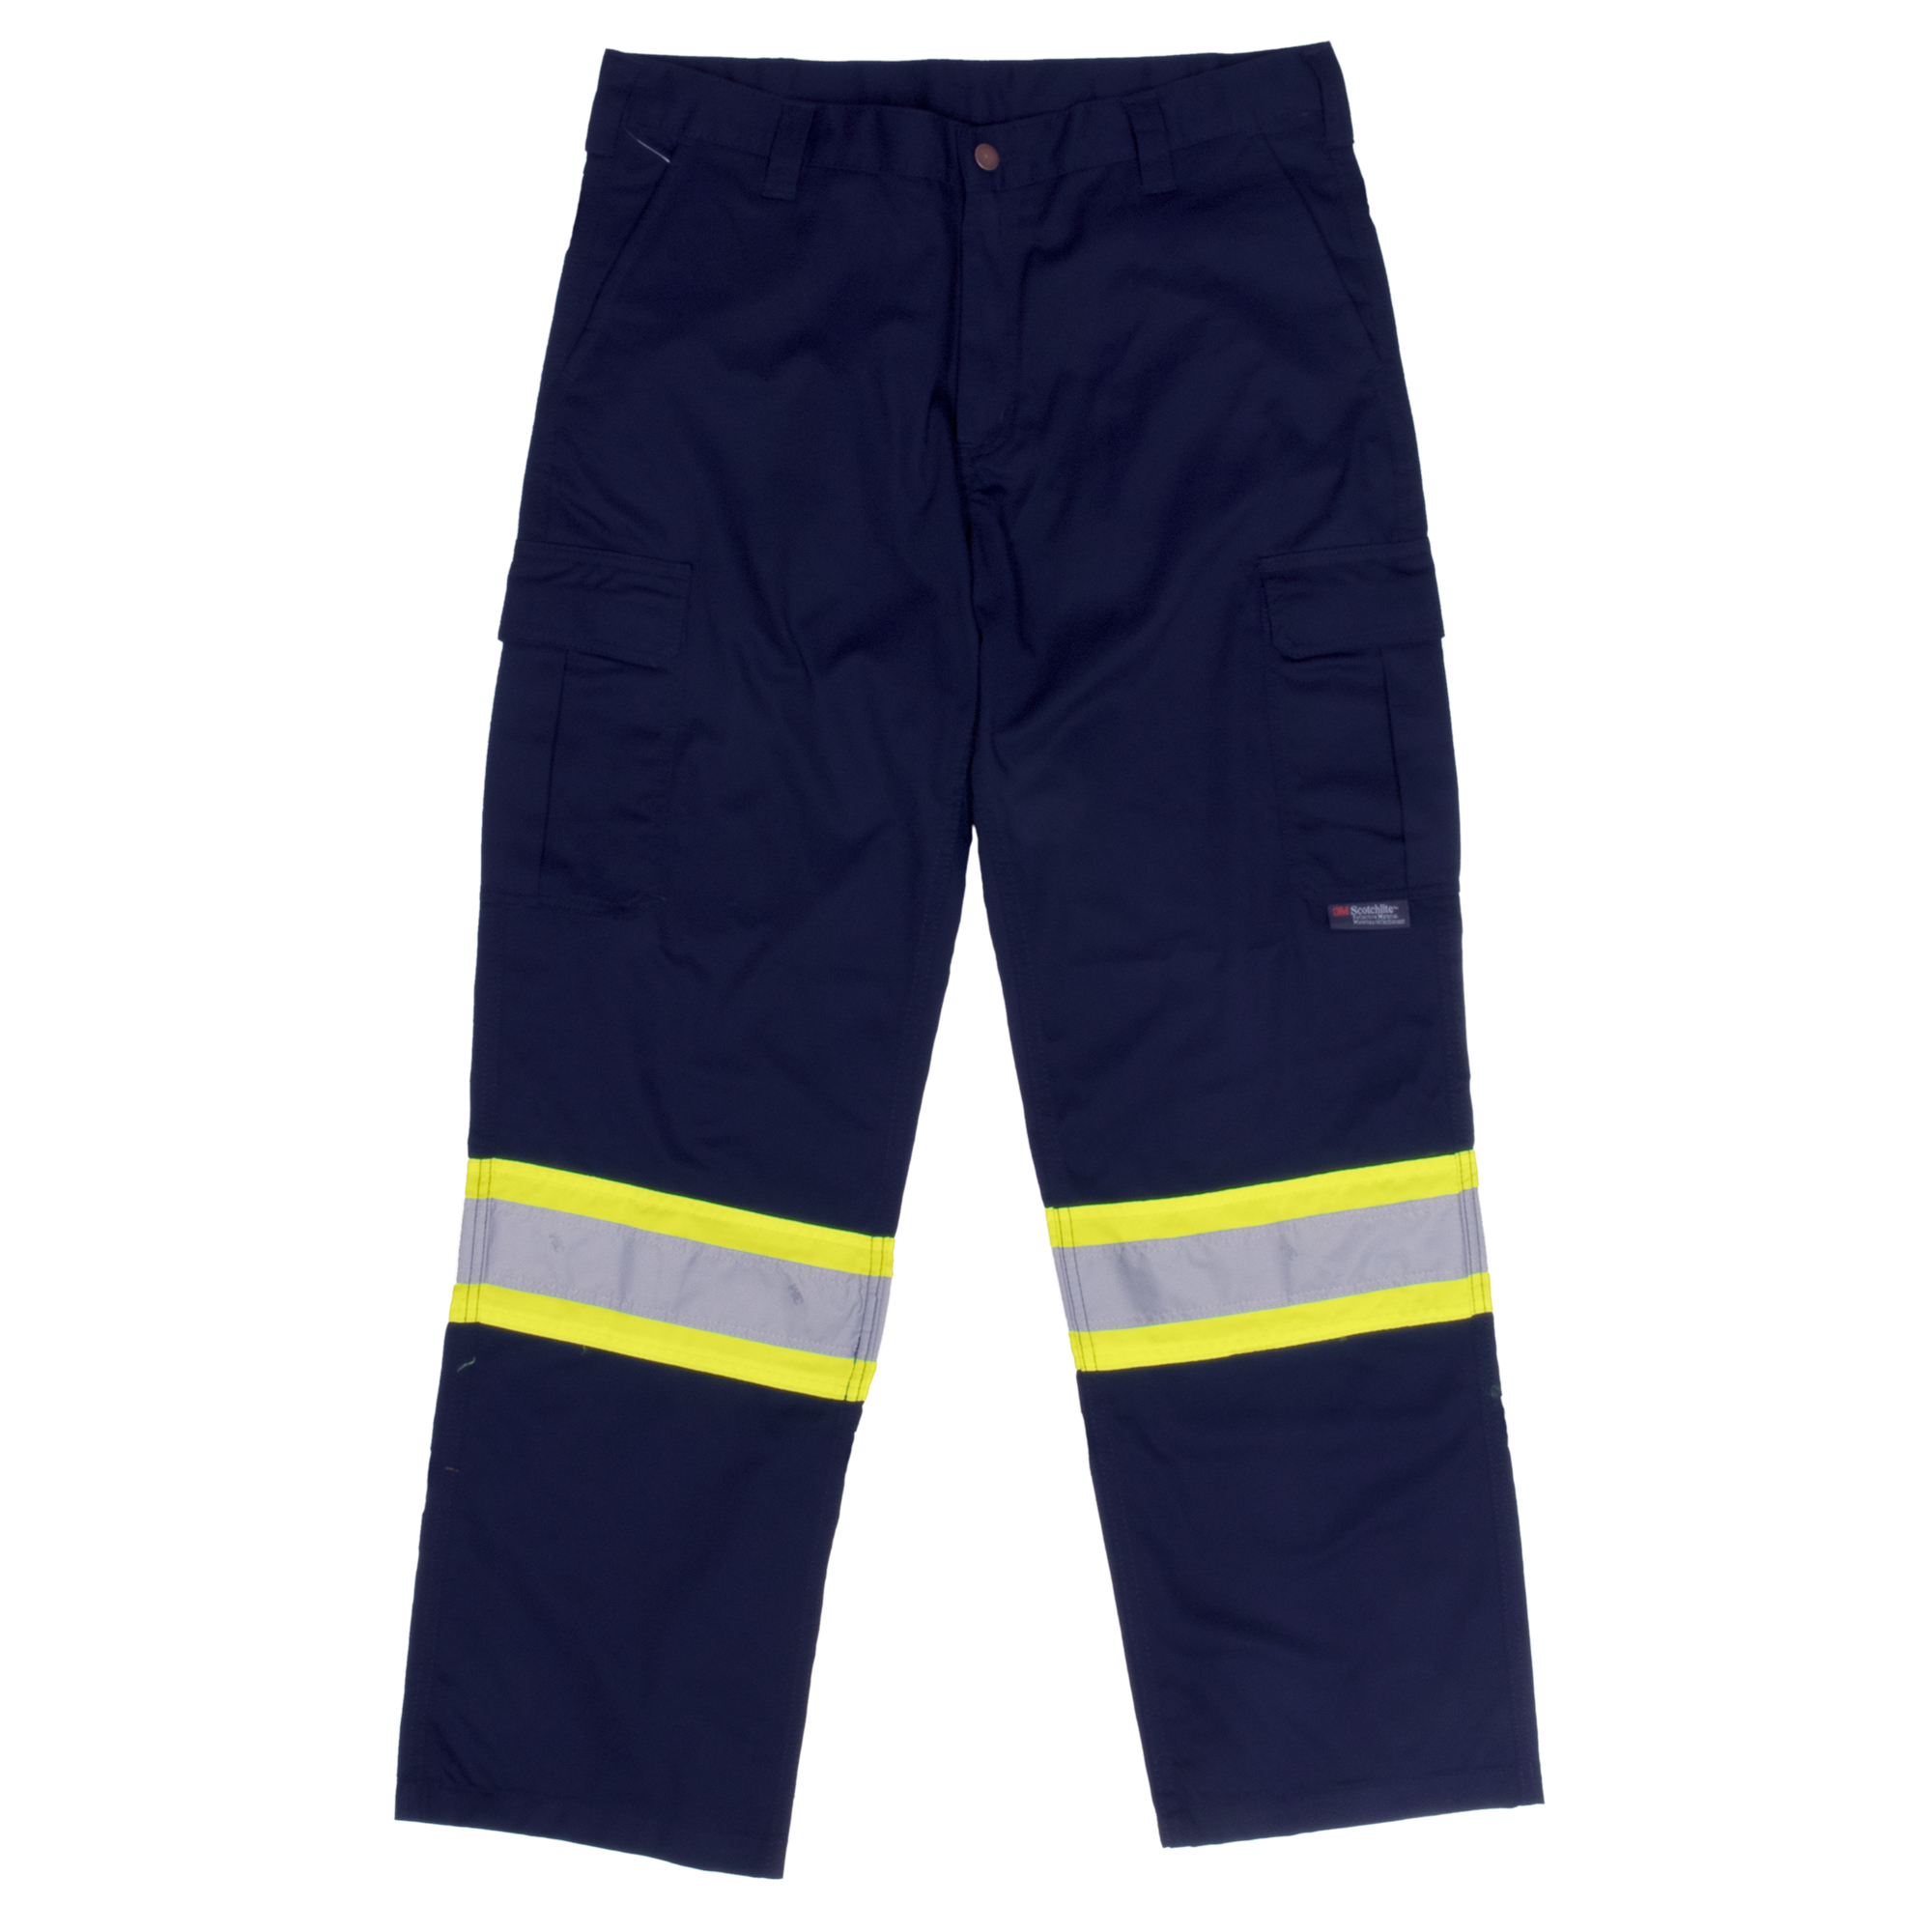 Tough Duck, Safety Cargo Utility Pant, Waist 44 in, Inseam 30 in, Color Navy, Model S60701